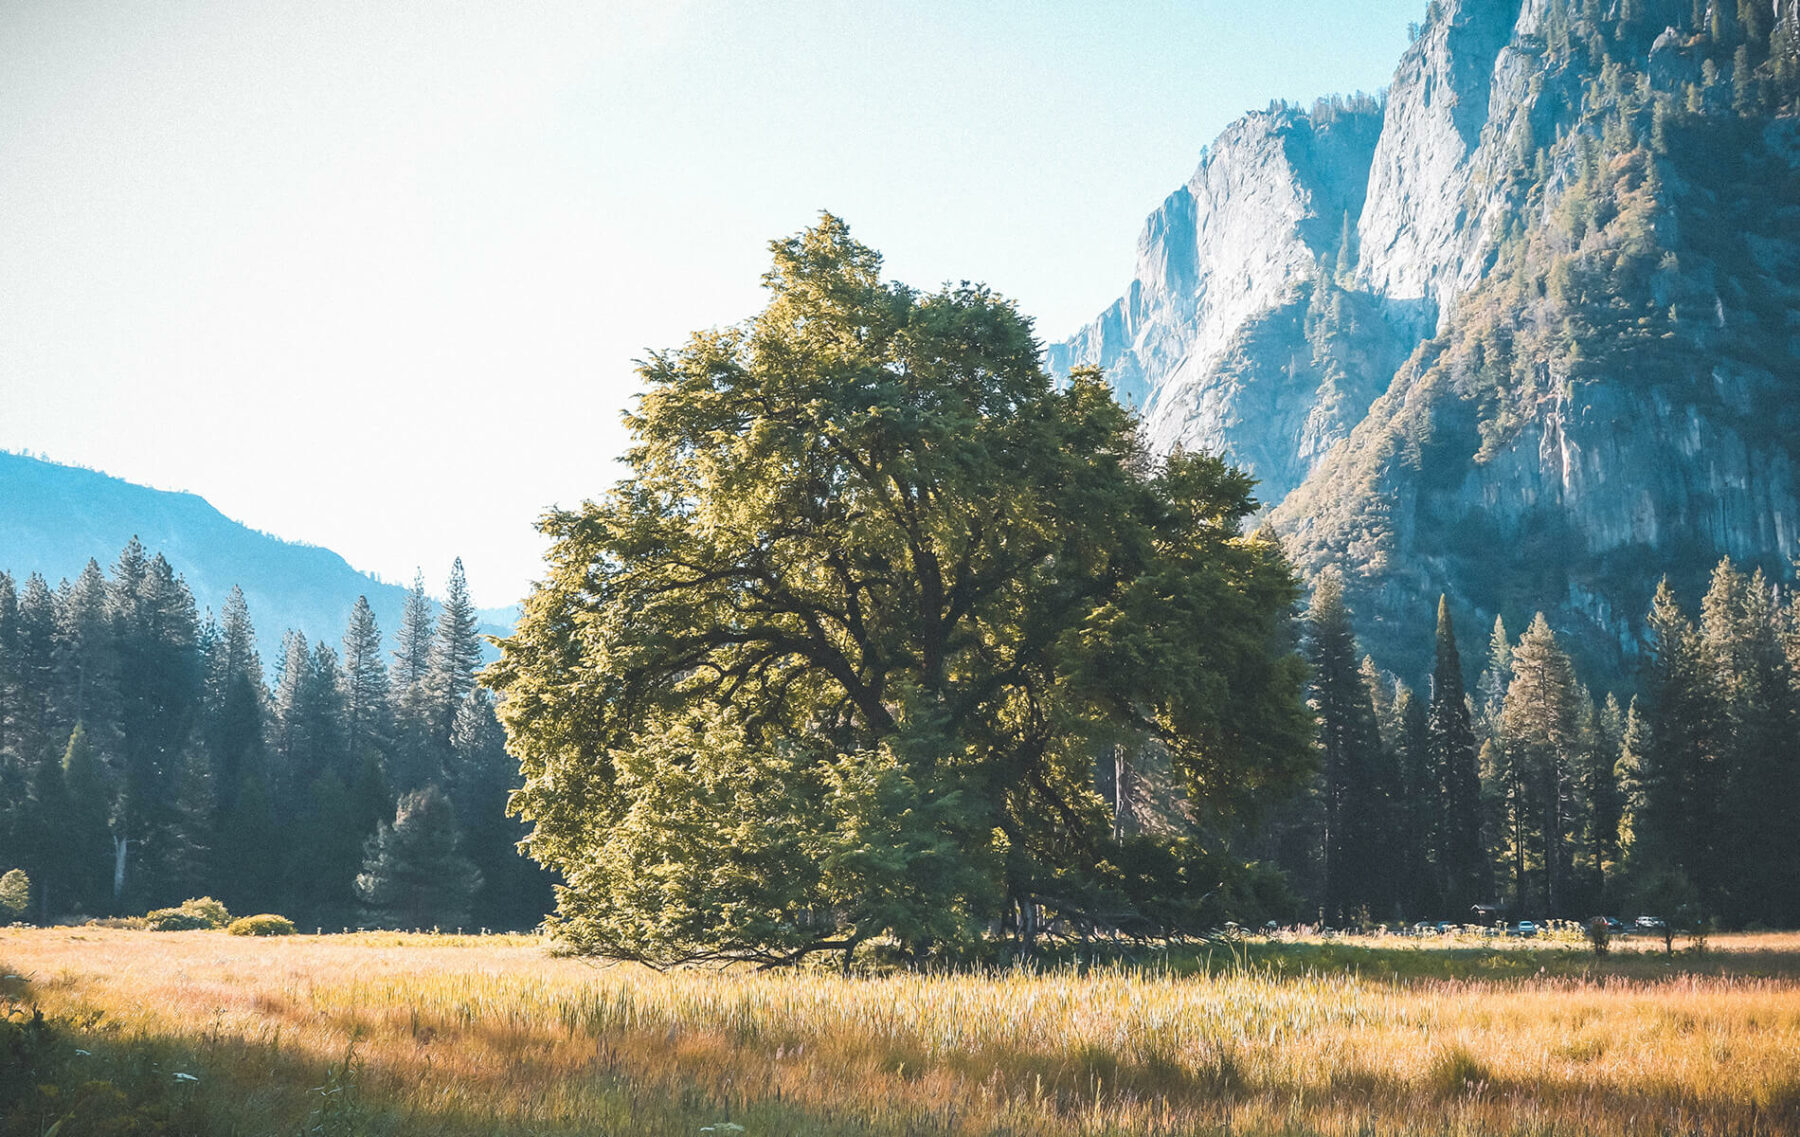 a large tree in a field with mountains in the background.